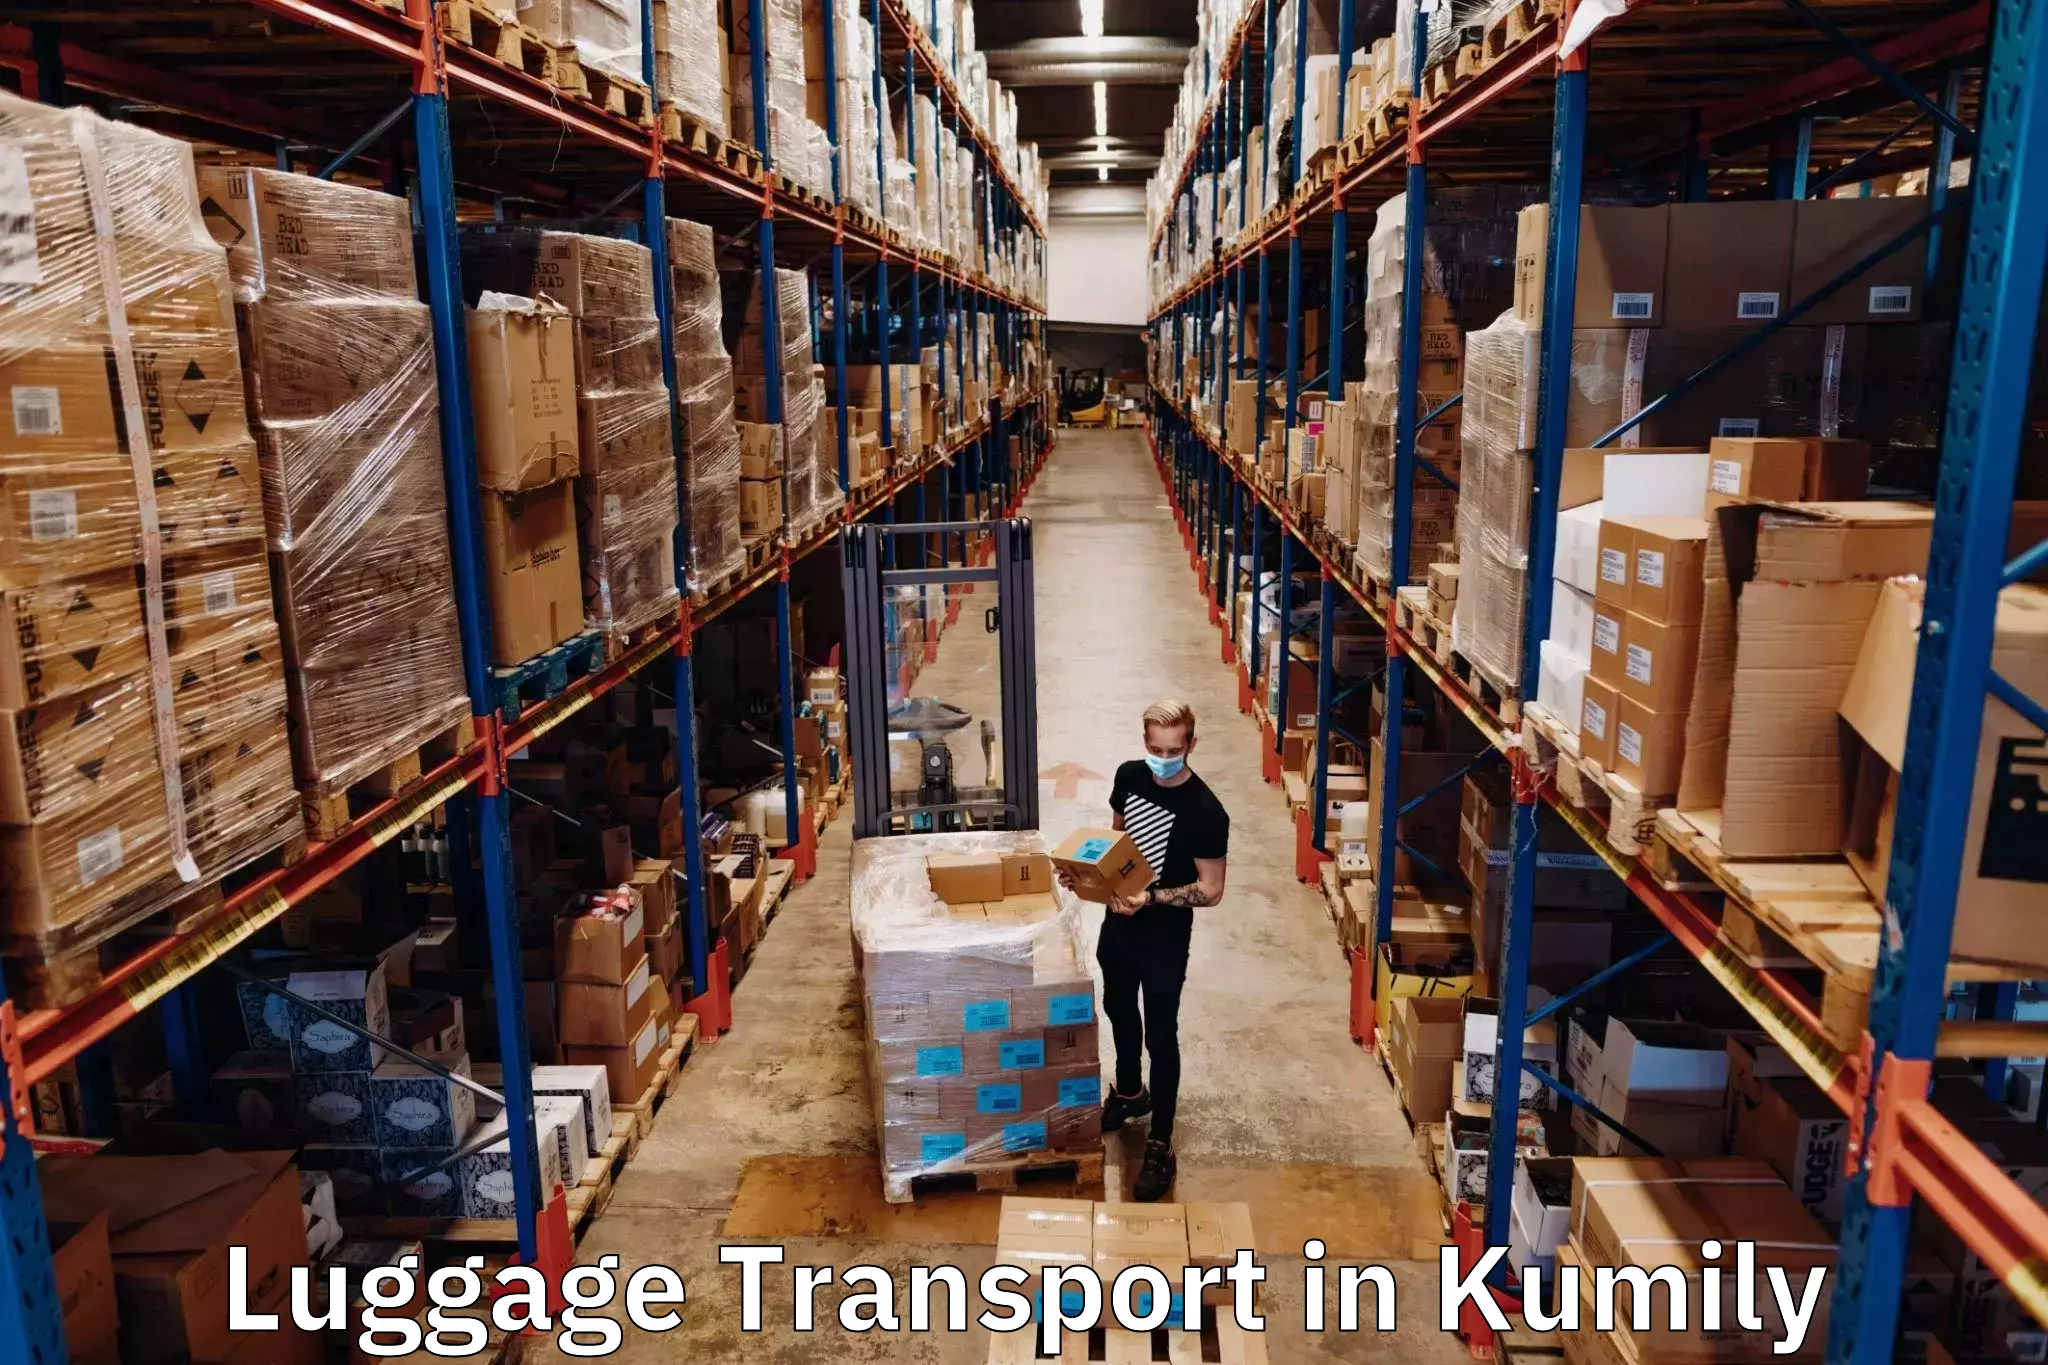 Baggage transport technology in Kumily